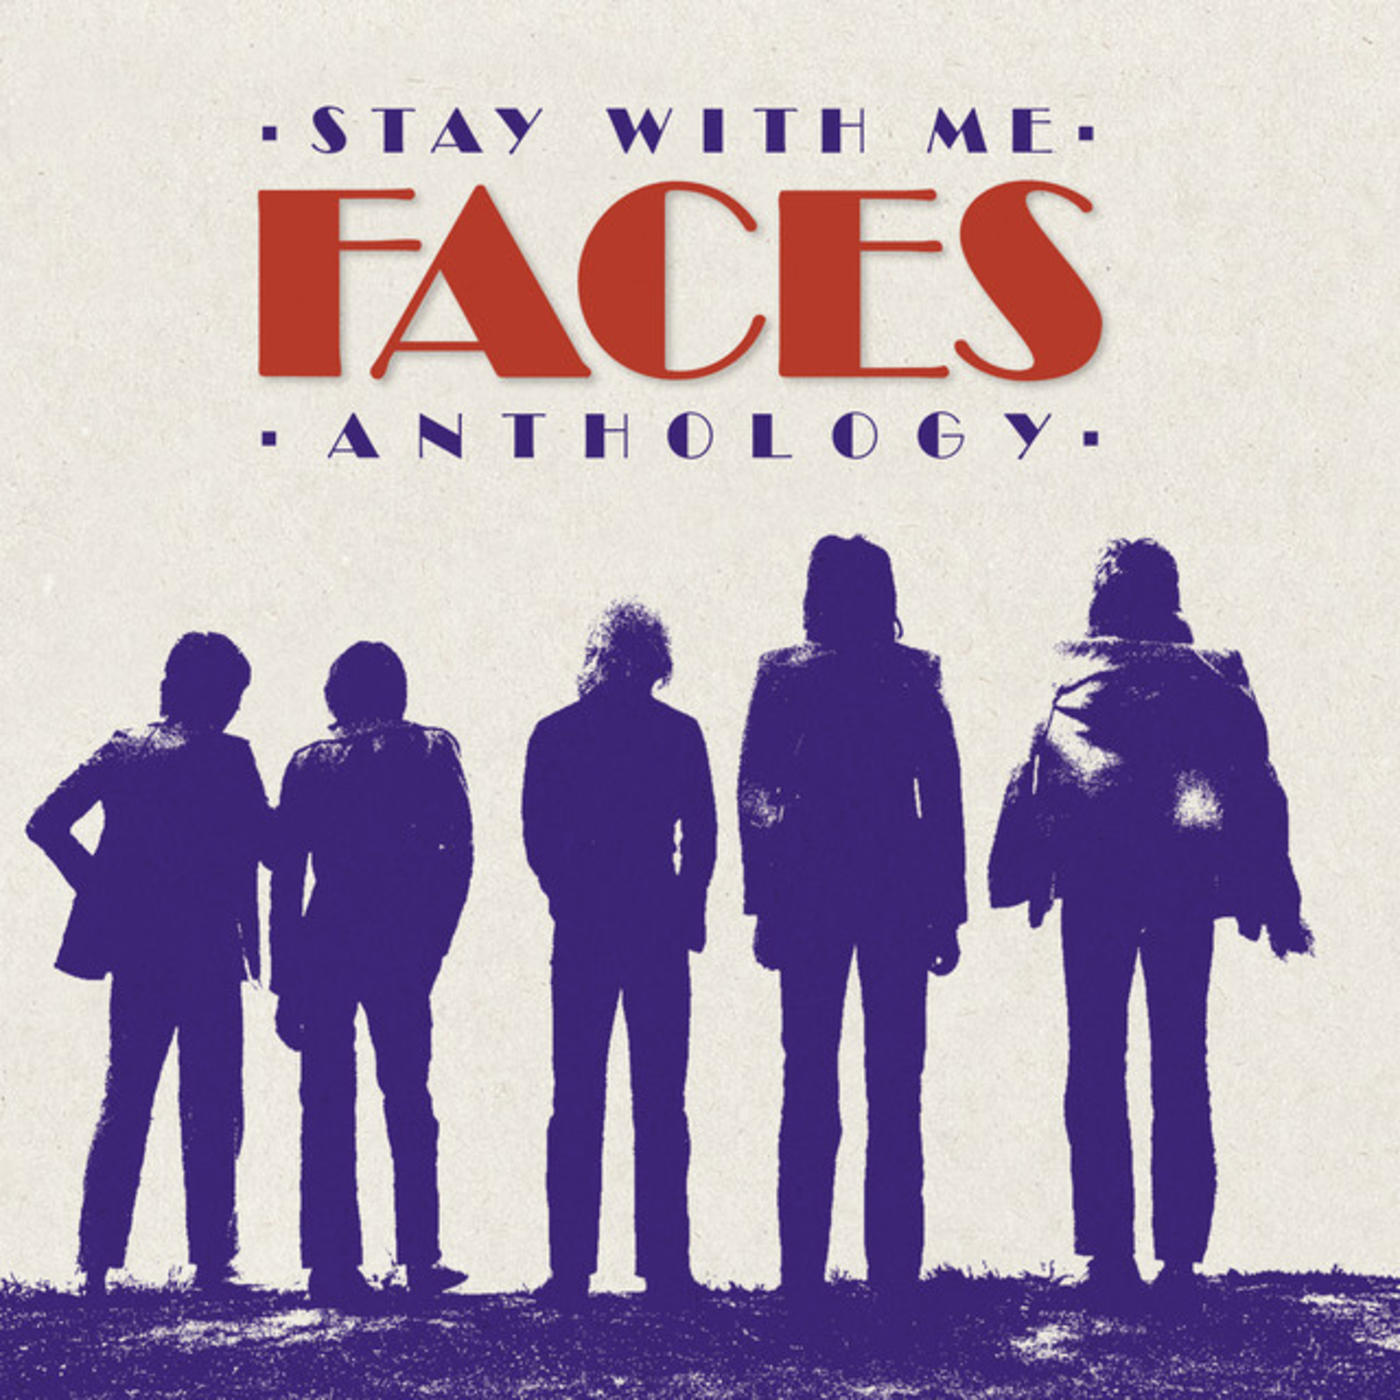 Stay With Me: The Faces Anthology